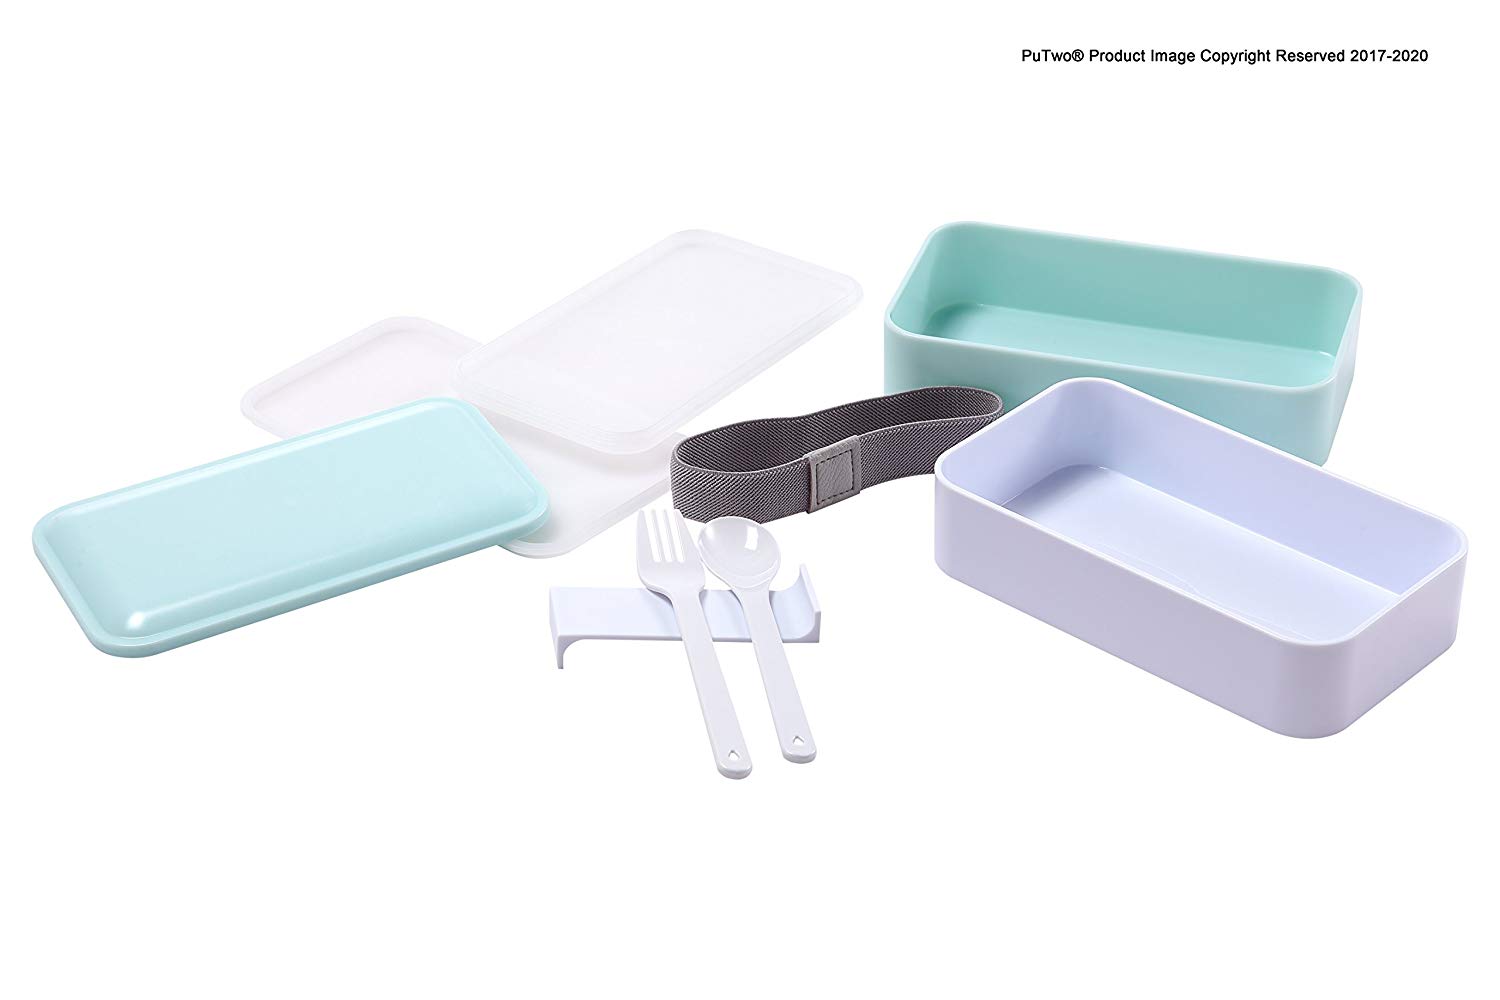 Bento Box 2 Tiers Bento Lunch Box Lunch Boxes with Reusable Cutlery Japanese Style for Microwave Freezer Dishwasher Bento Boxes for Kids Adults Work School - Pastel Blue PuTwo - image 3 of 6